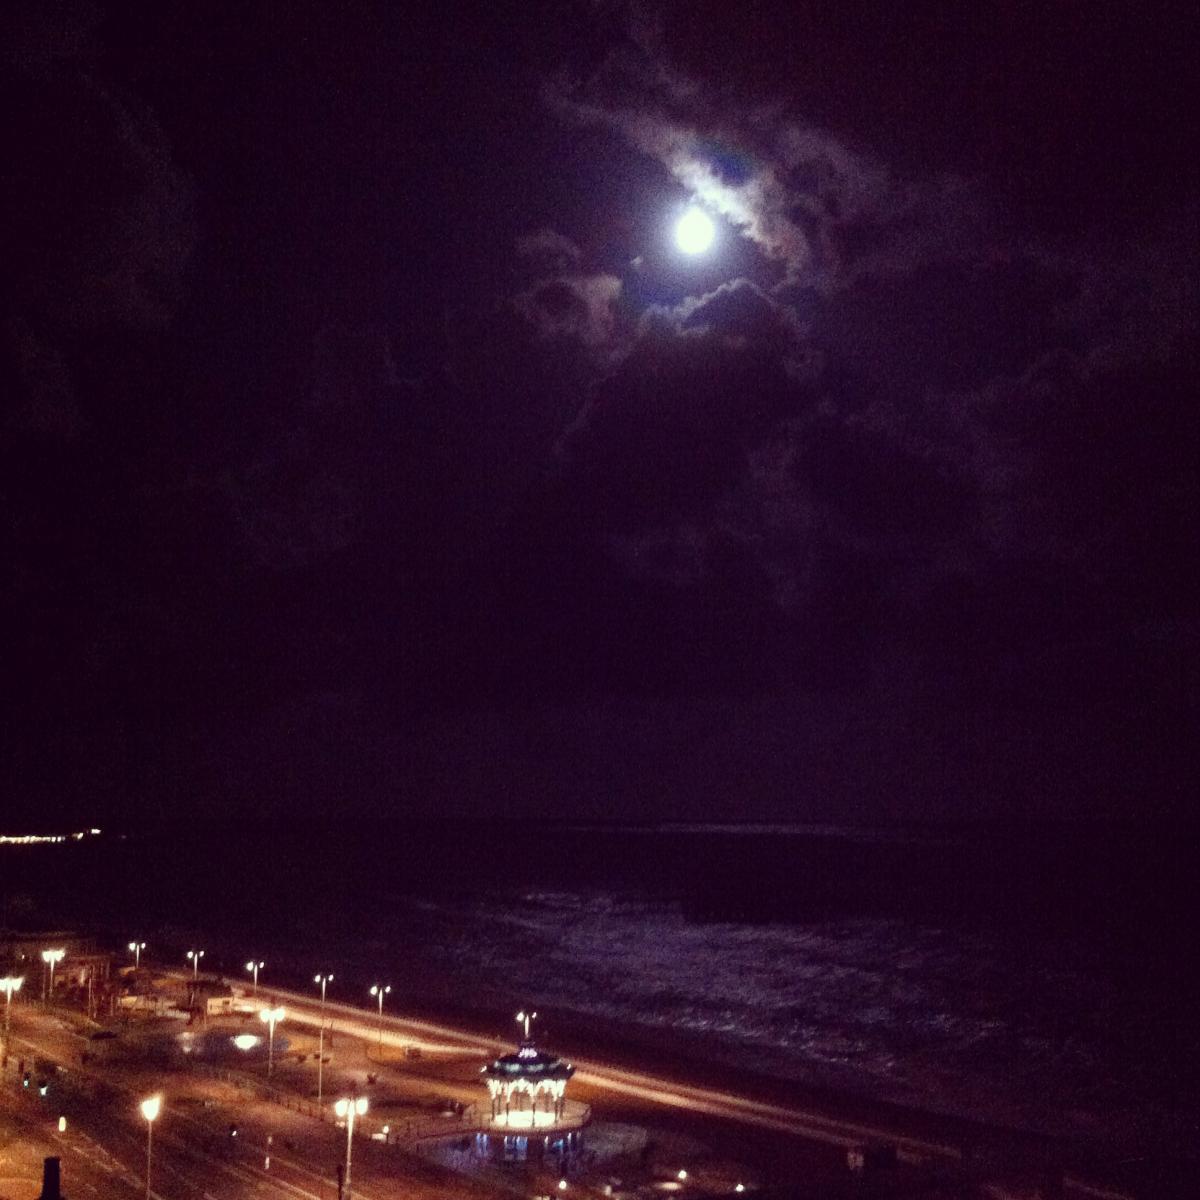 Kate sent us this picture of the supermoon over Brighton seafront.